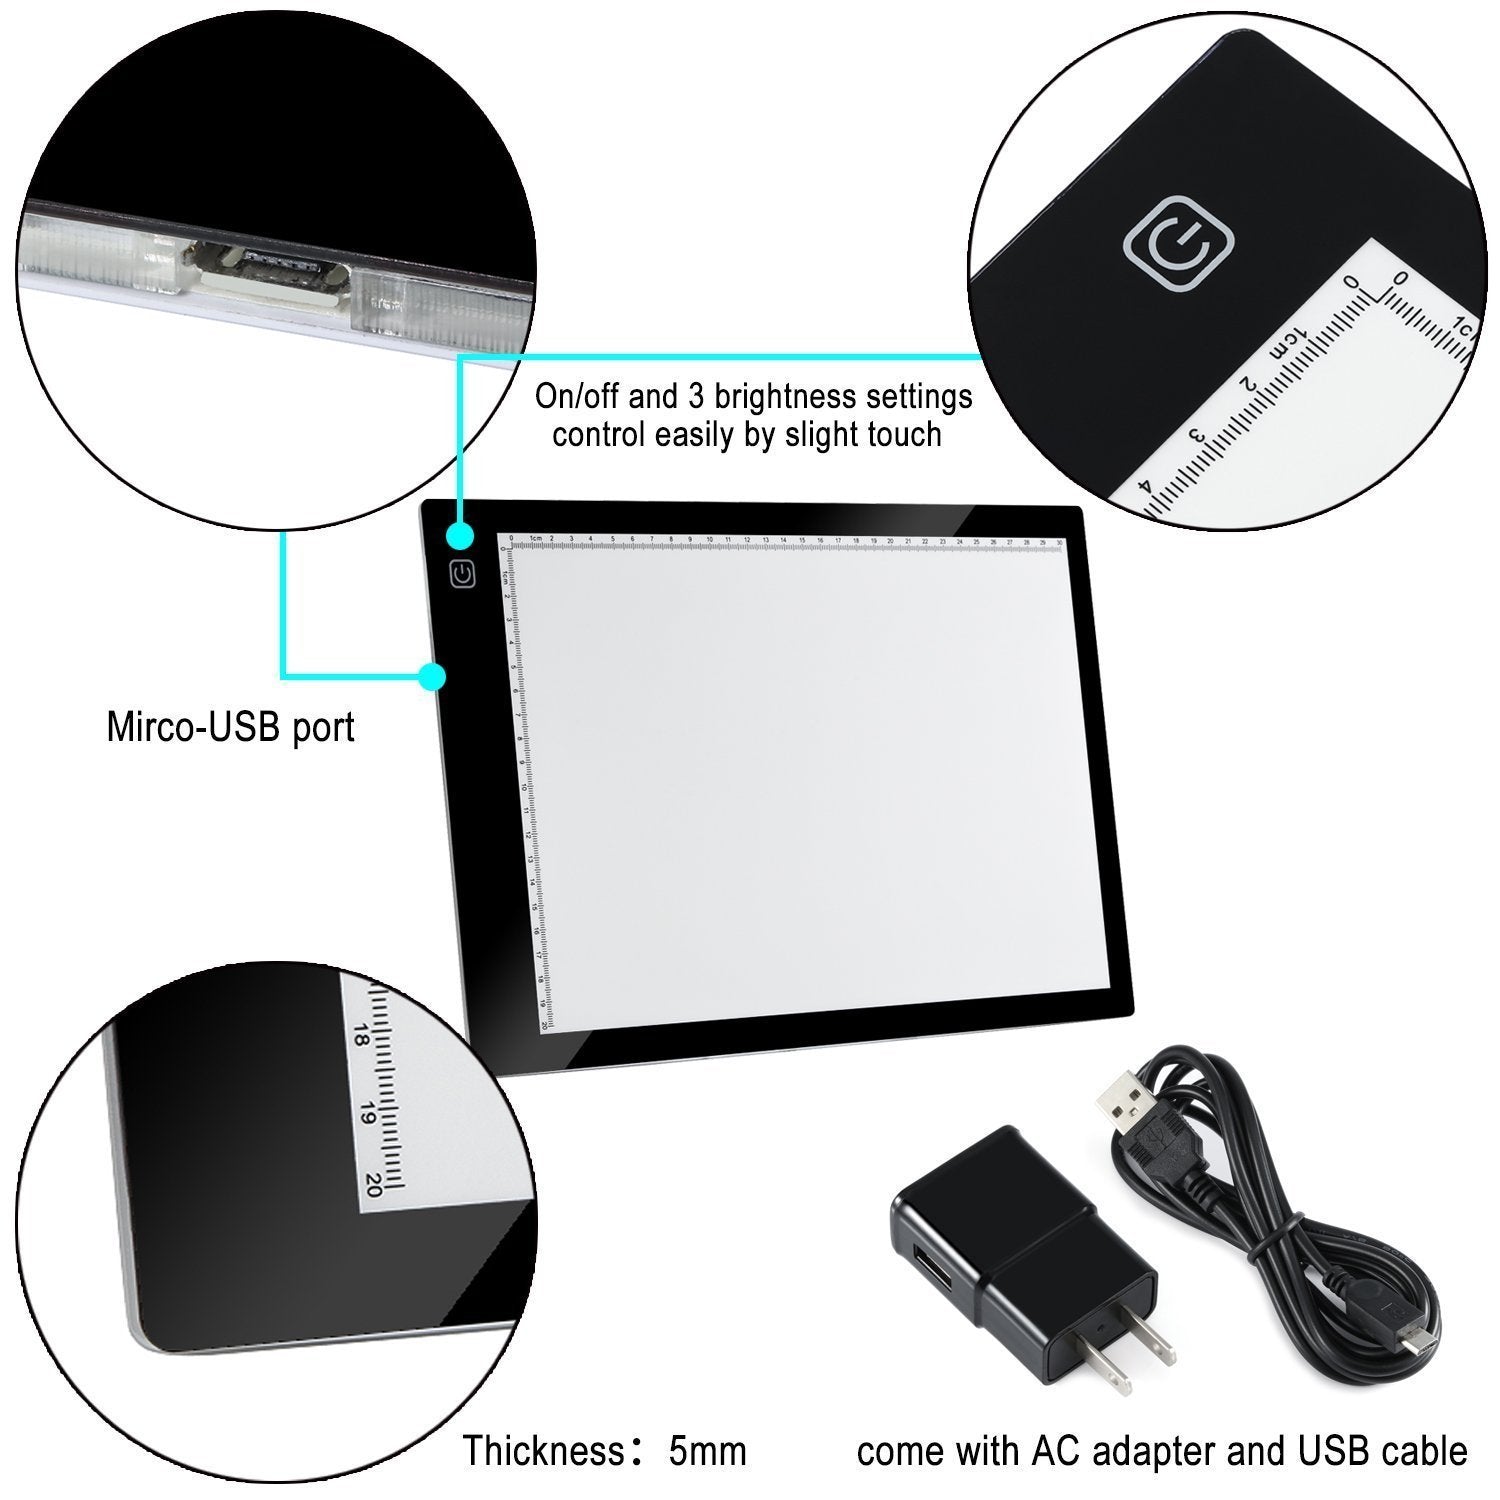 A4 LED Tracing Light Box Dimmable Tracer Portable Artists Drawing Board USB